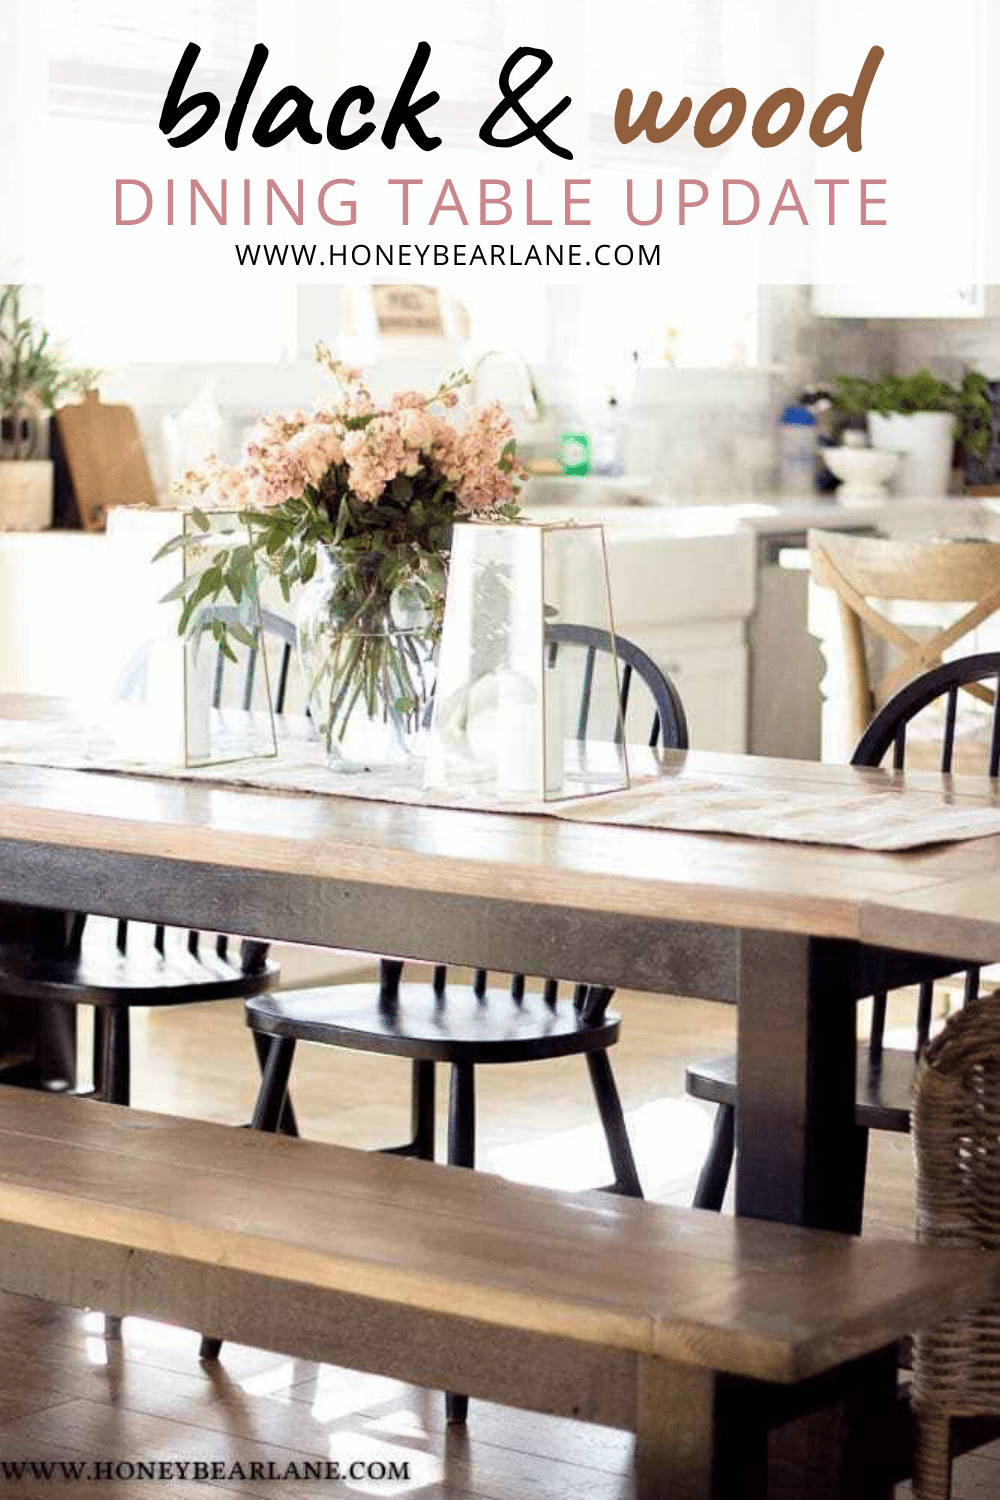 Black and Wood Dining Table Update - HoneyBearLane ; I'm loving black right now so I chose a black and wood dining table for my makeover. I love how it complements the other accents in my home.